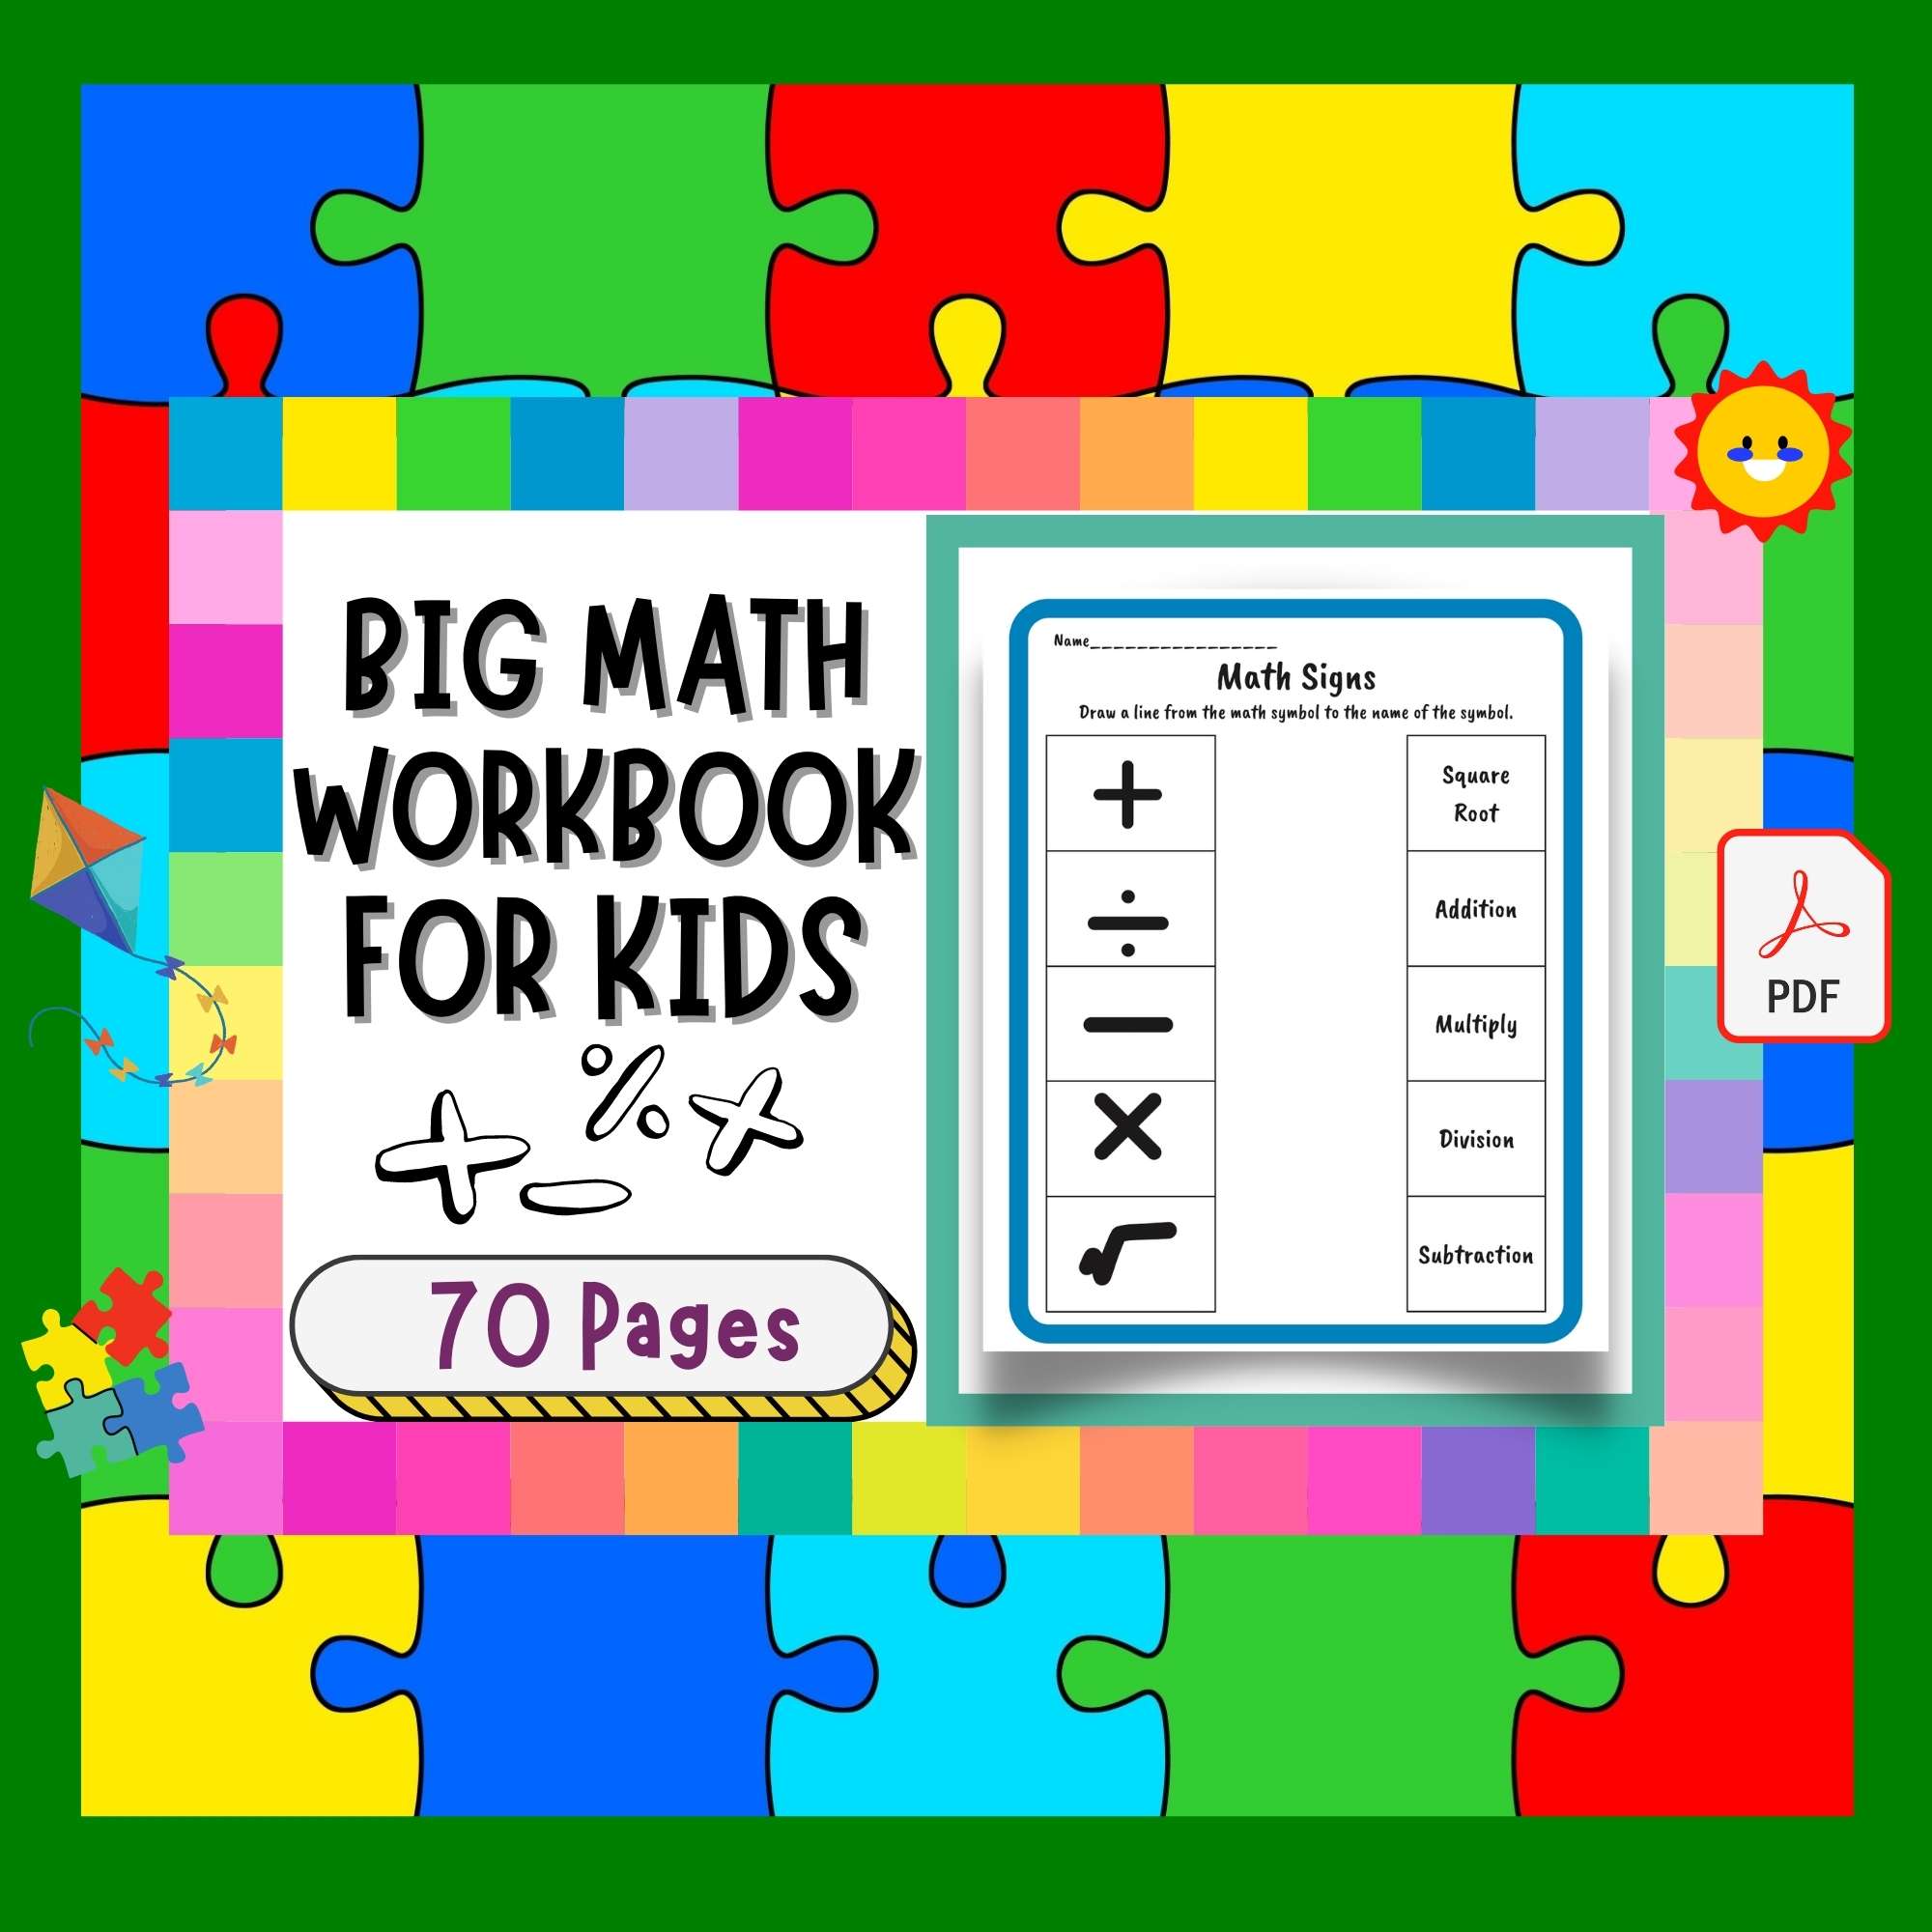 Division, Multiplication, Subtraction, and Addition Practice Worksheets for Kids preview image.